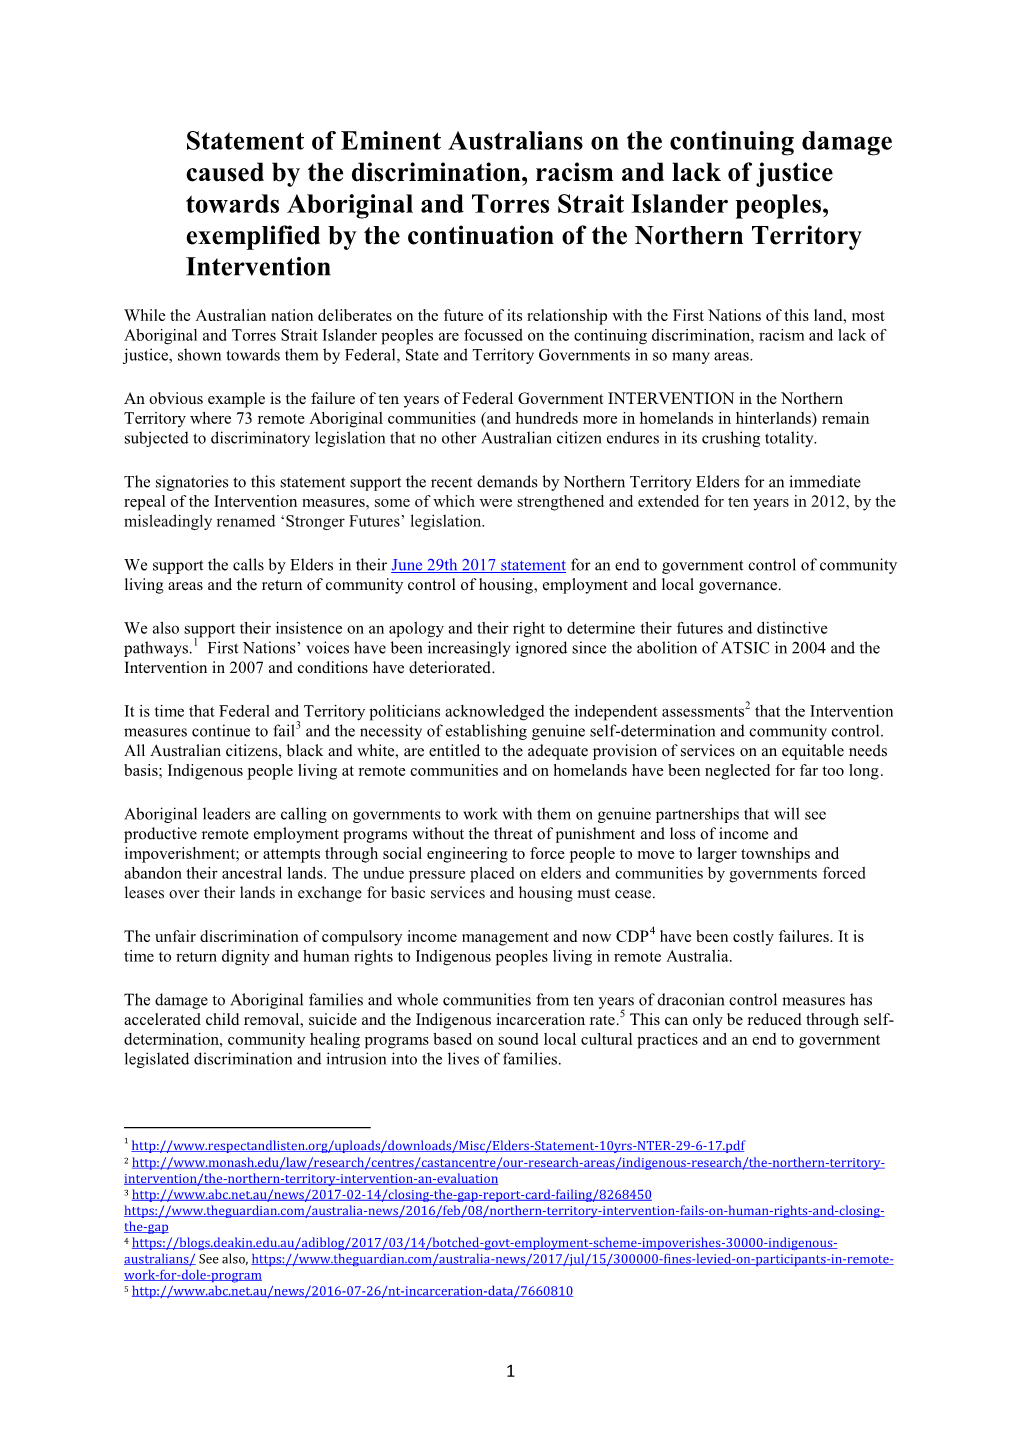 Northern Territory Intervention